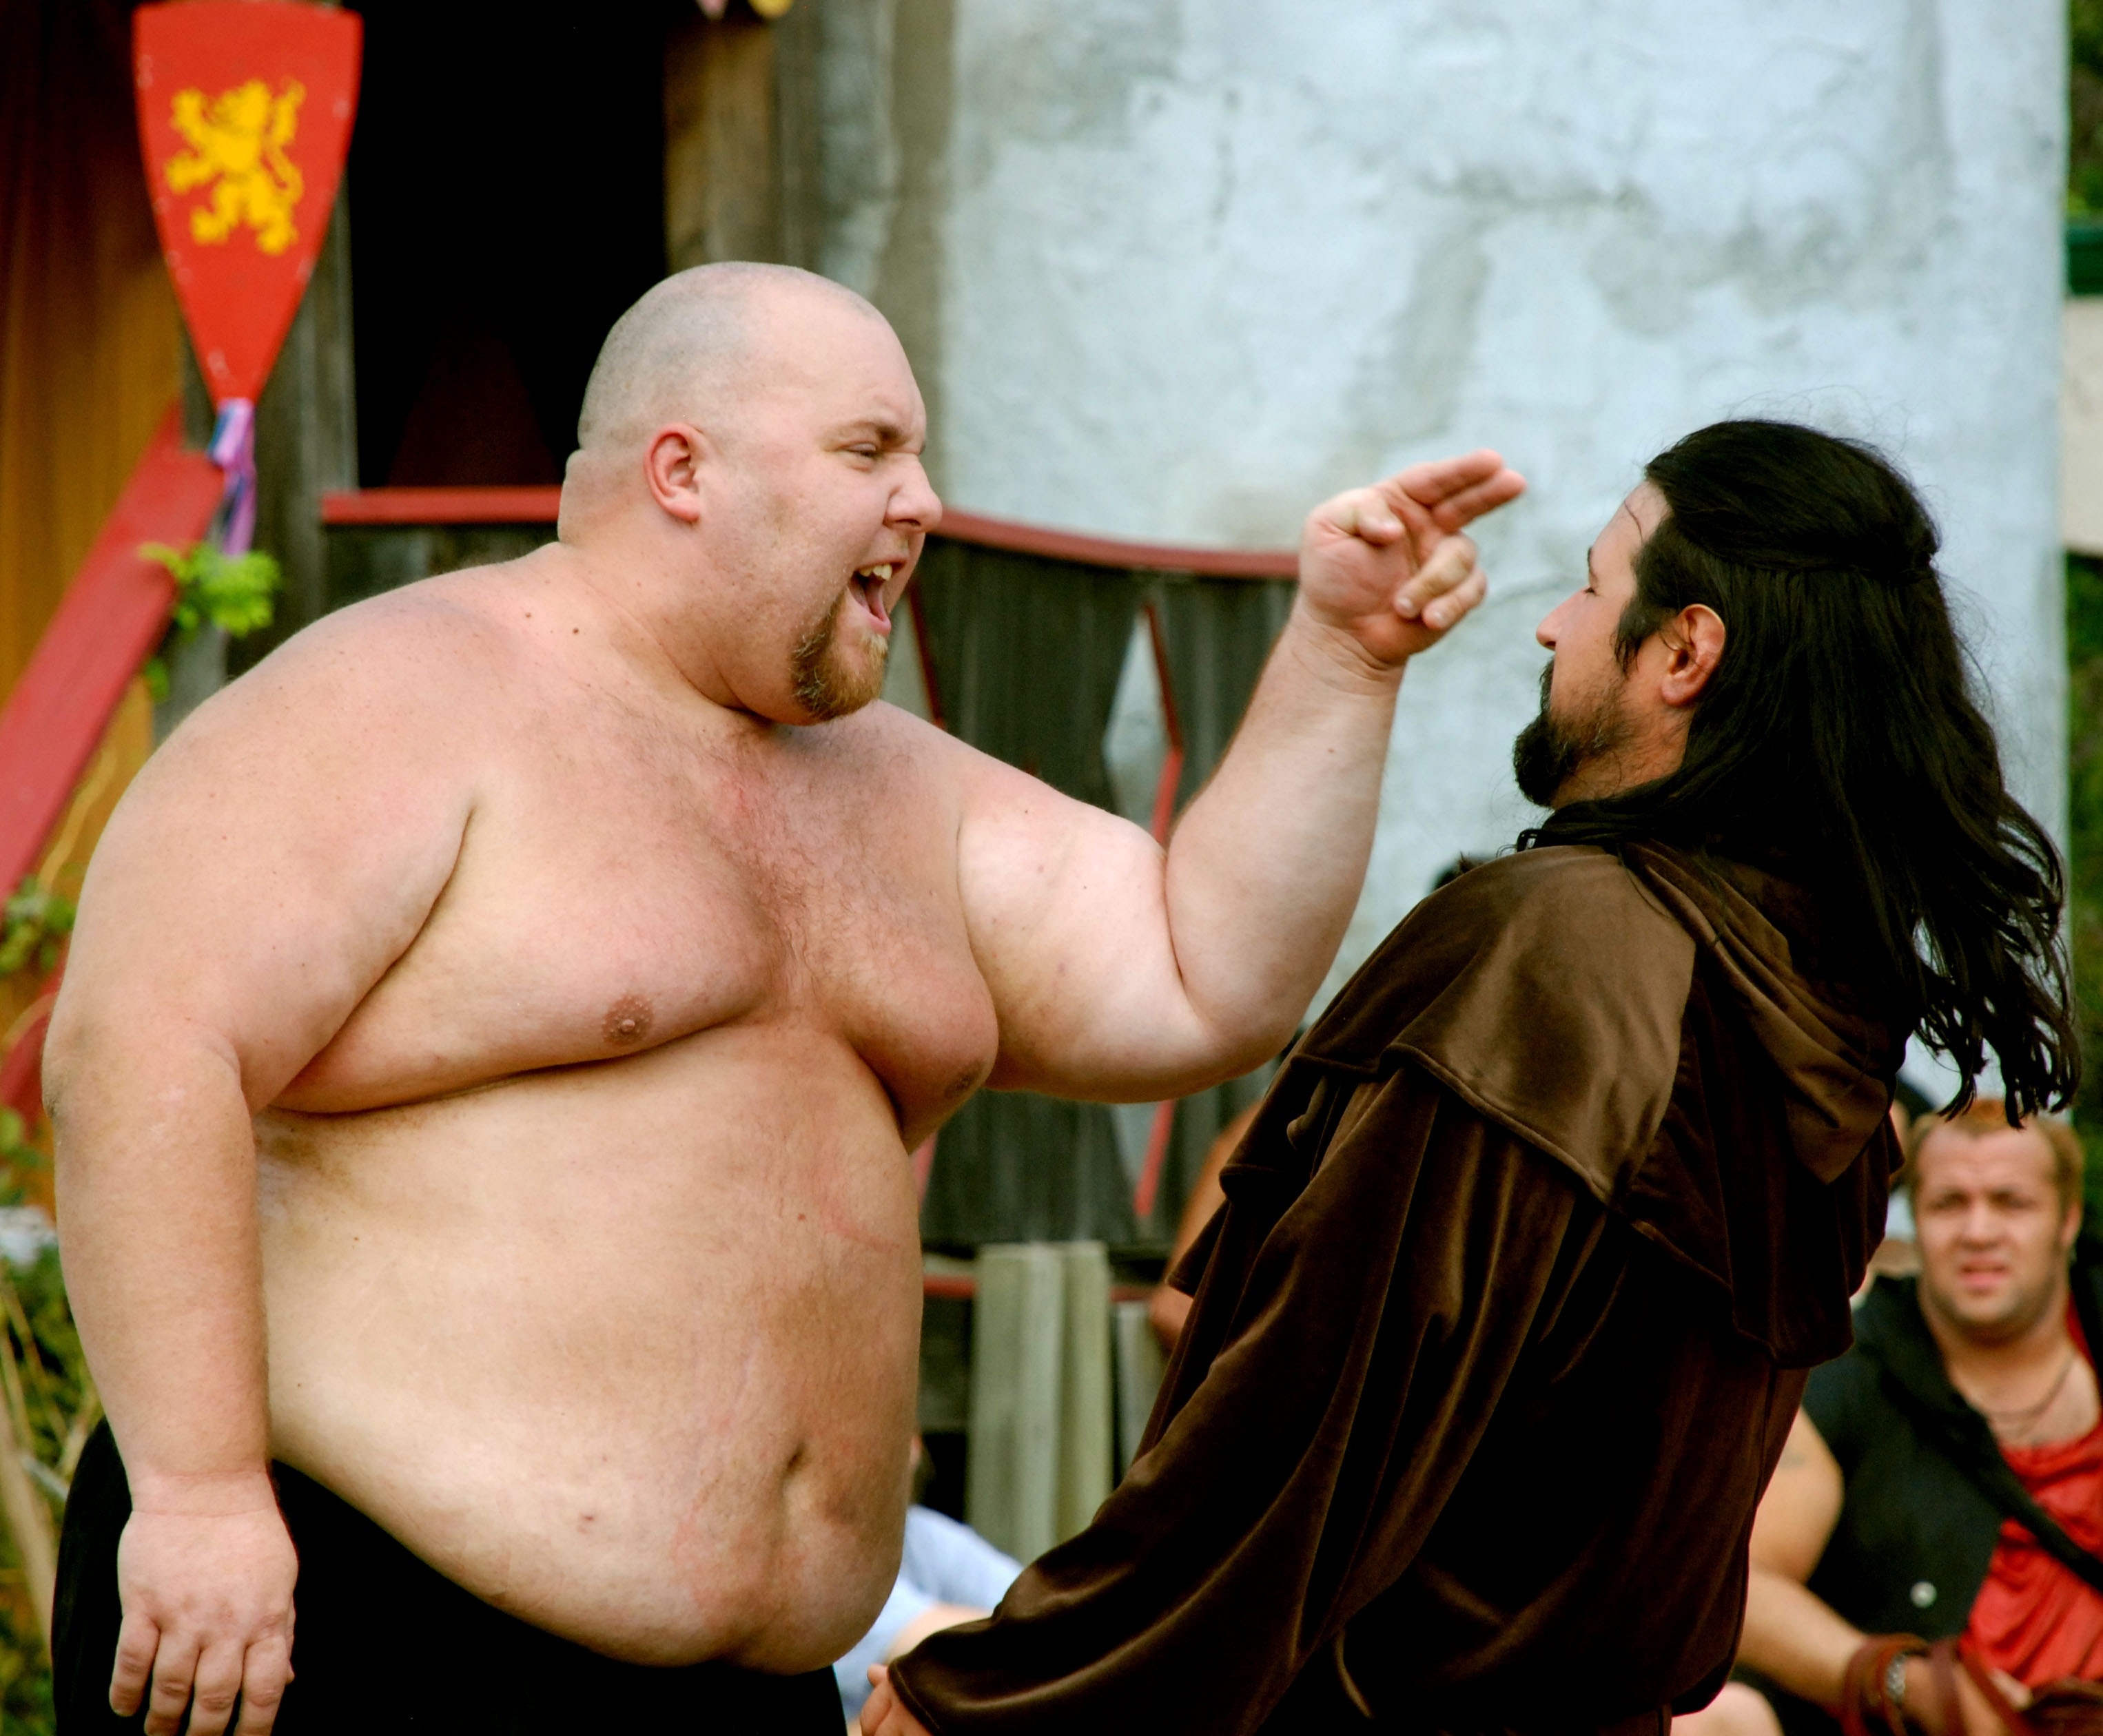 fat and bald shirtless man pointing his finger at a long-haired bearded man  free image | Peakpx